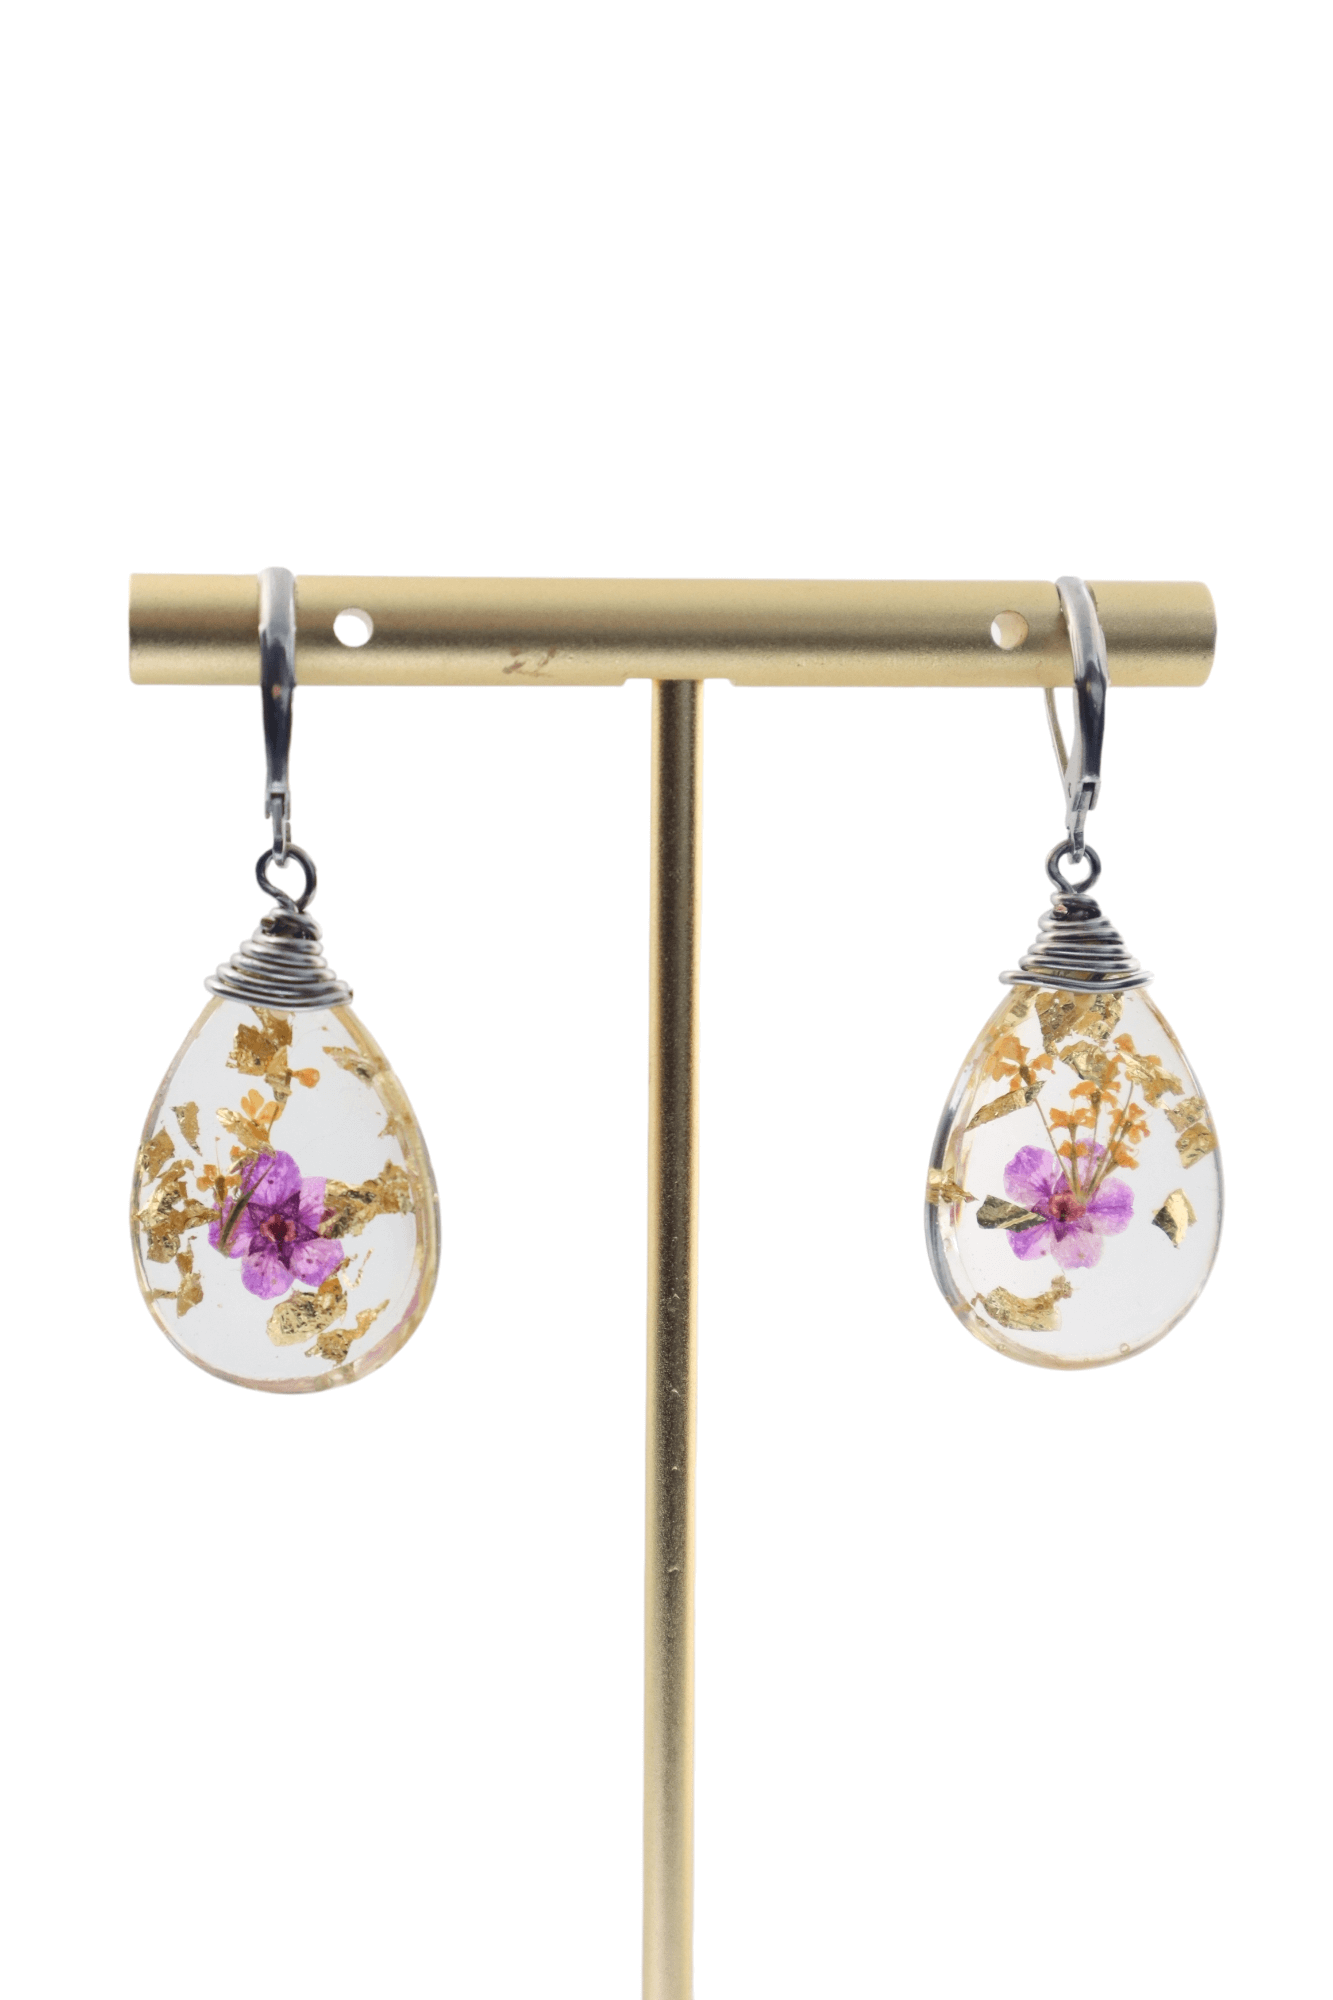 Jewelry-with-flowers---vintage-inspired-earrings---flower-jewelry---Kaleidoscopes-And-Polka-Dots